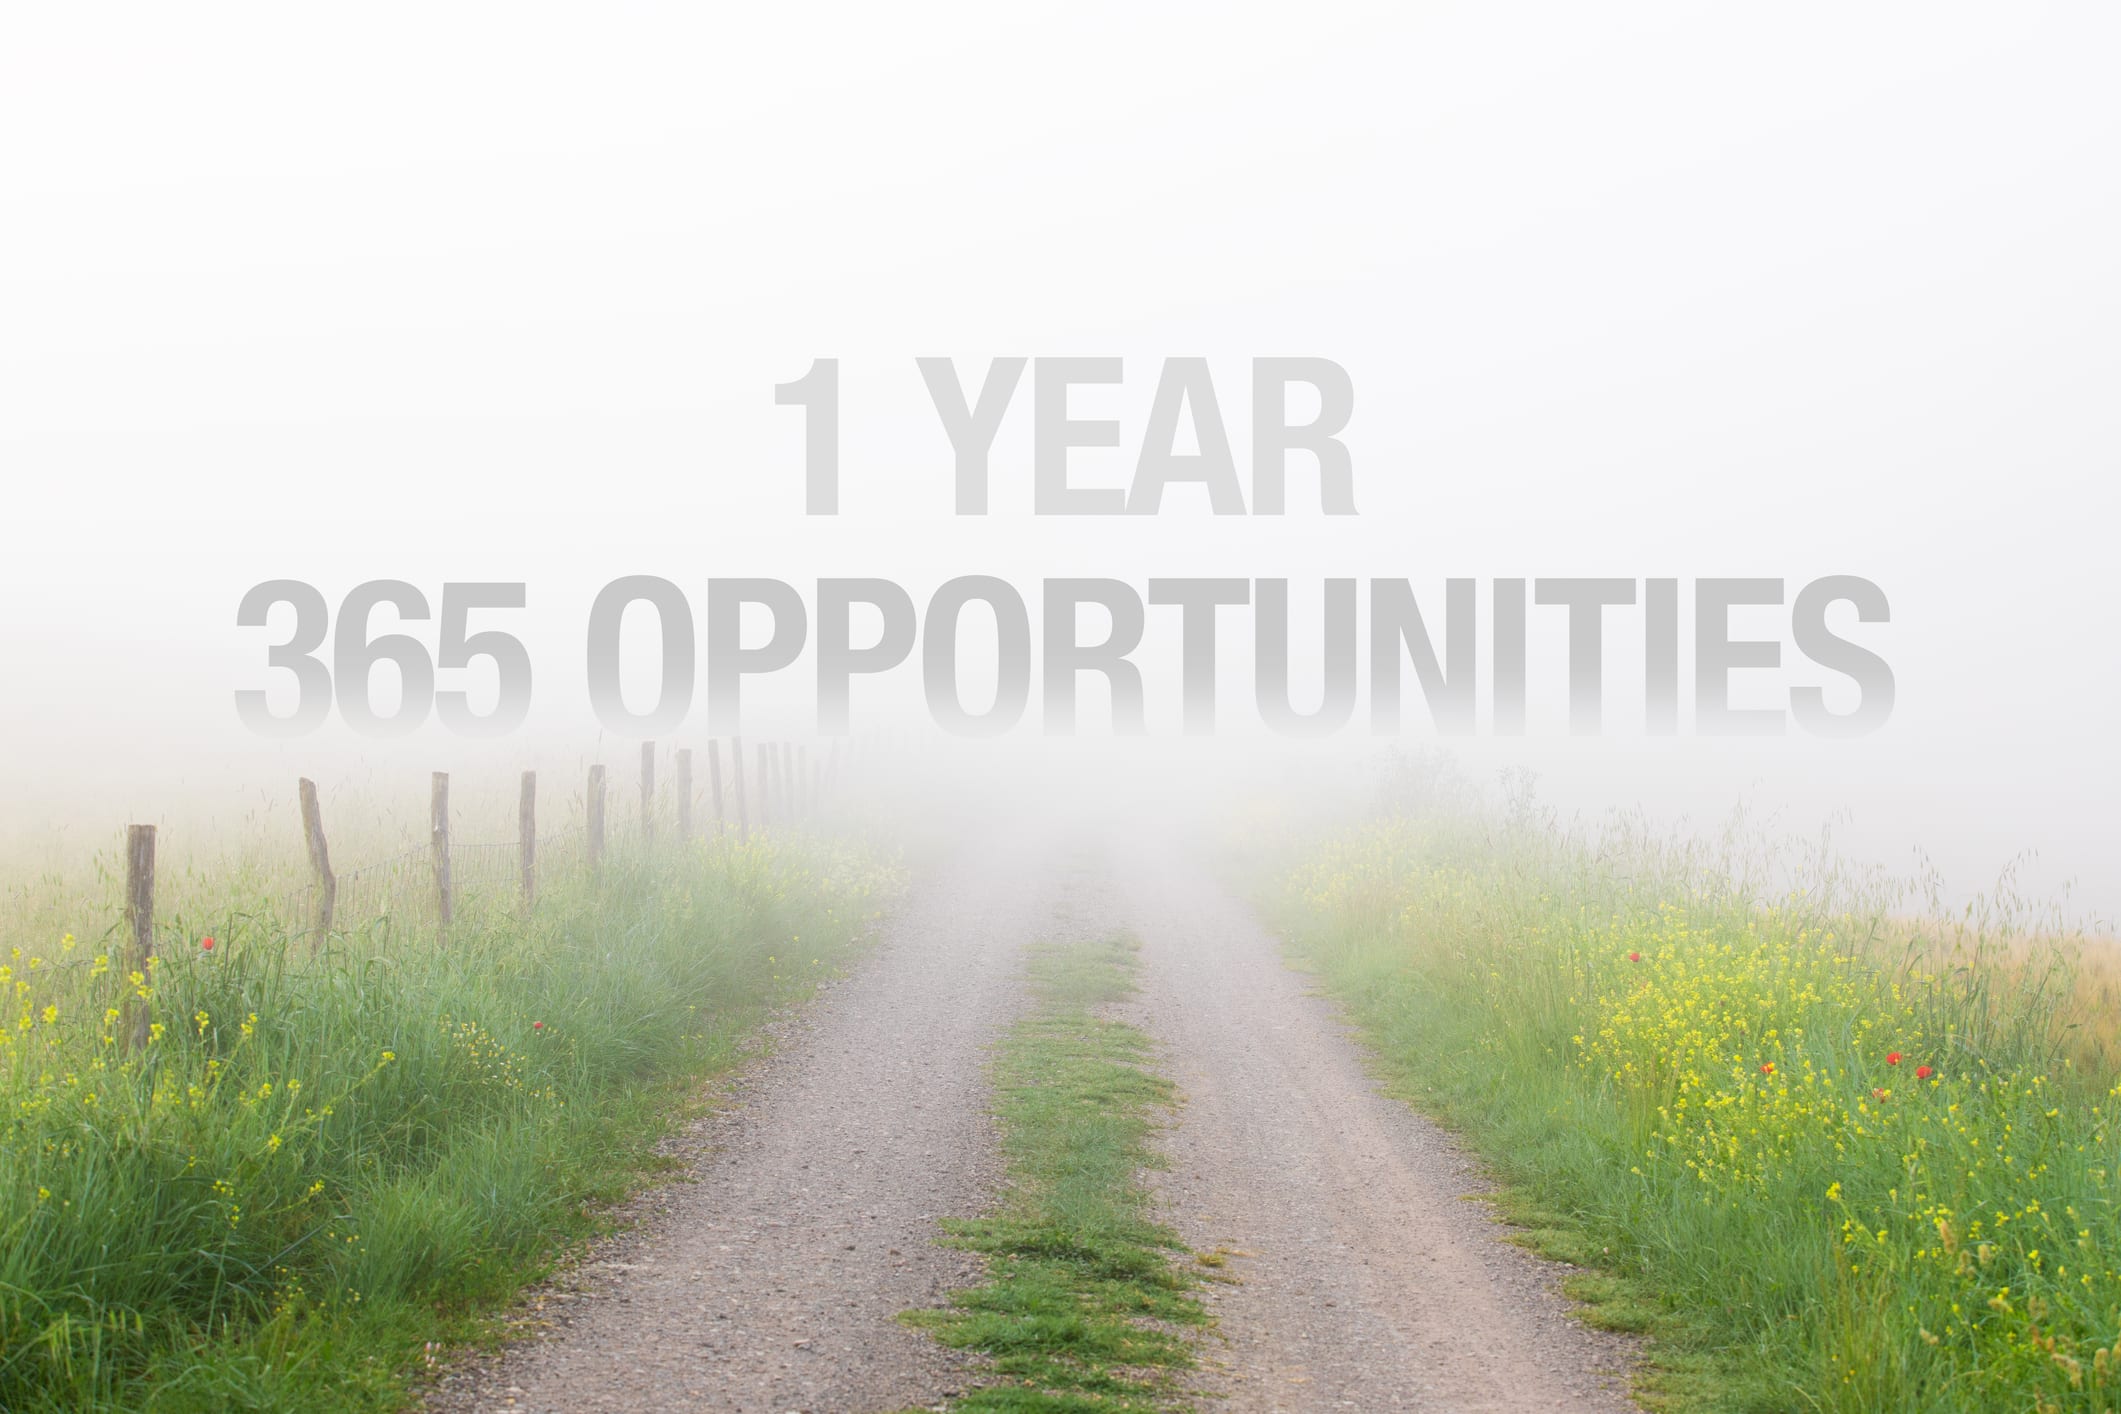 1 year 365 opportunities image